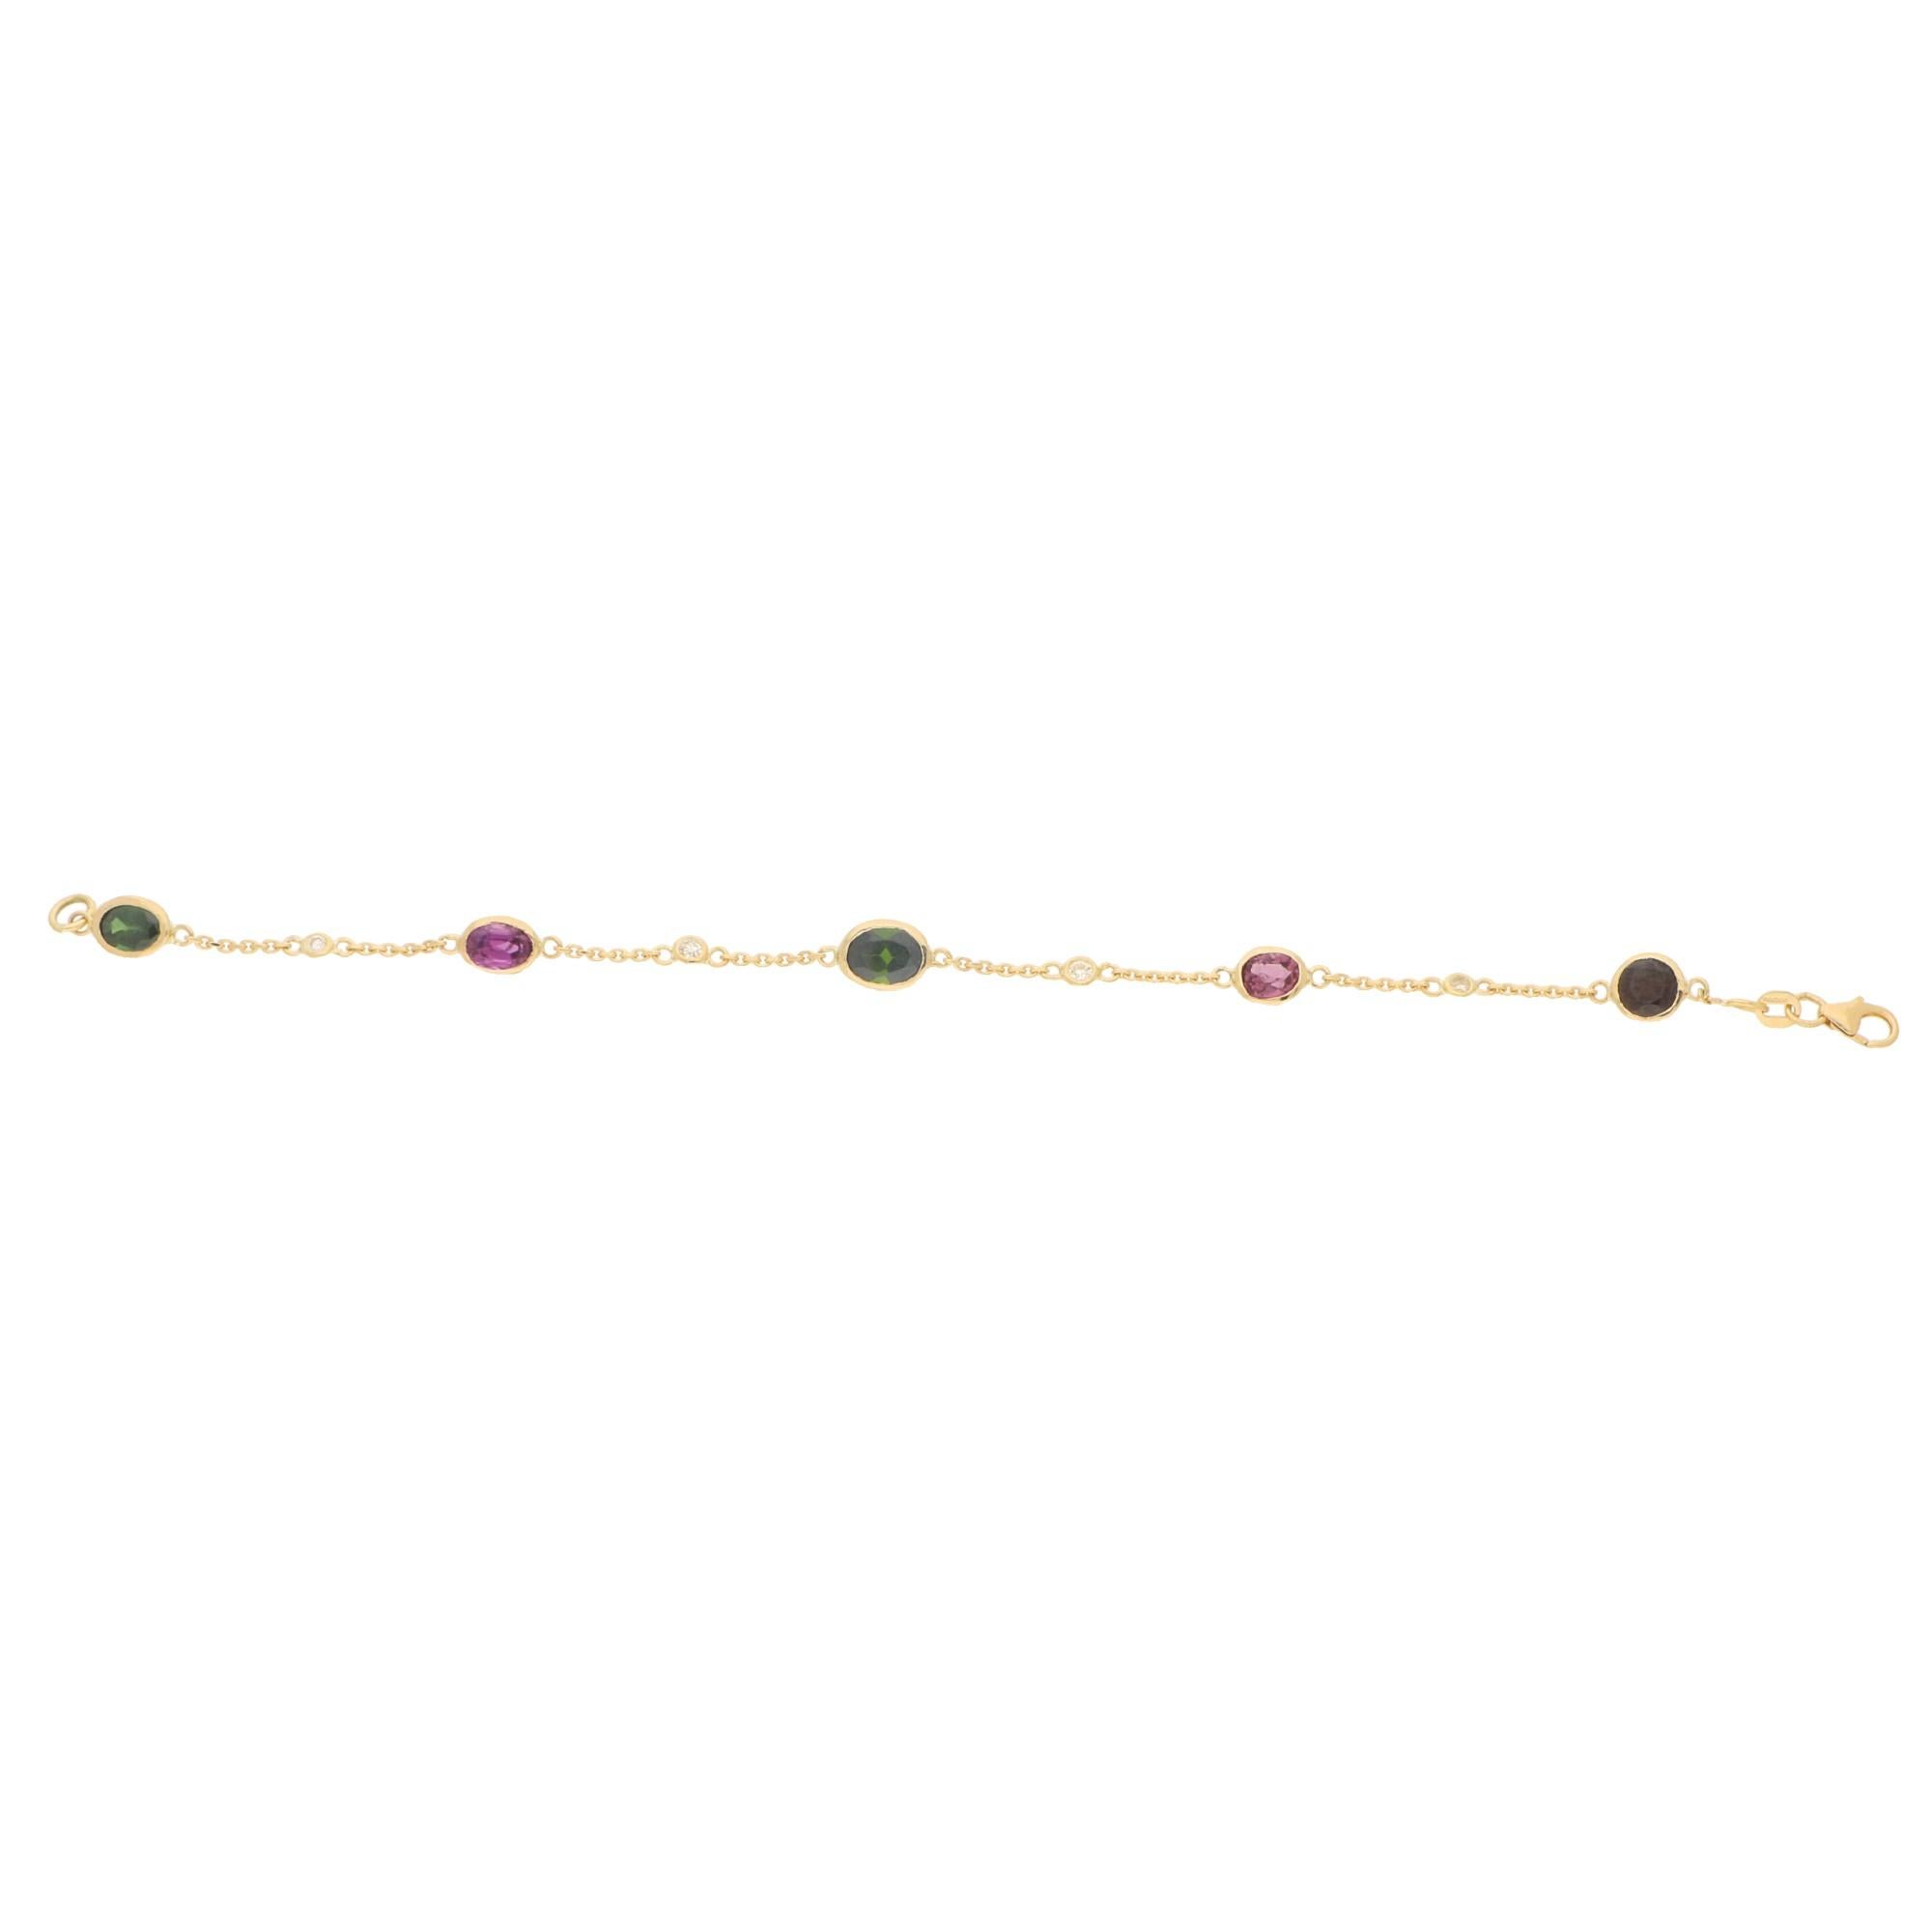 An elegant green and pink tourmaline and garnet spectacle bracelet set in 18k yellow gold. The piece is composed of a mixture of five vibrant pink and green tourmalines and a single garnet each being separated by a rub over set round brilliant cut